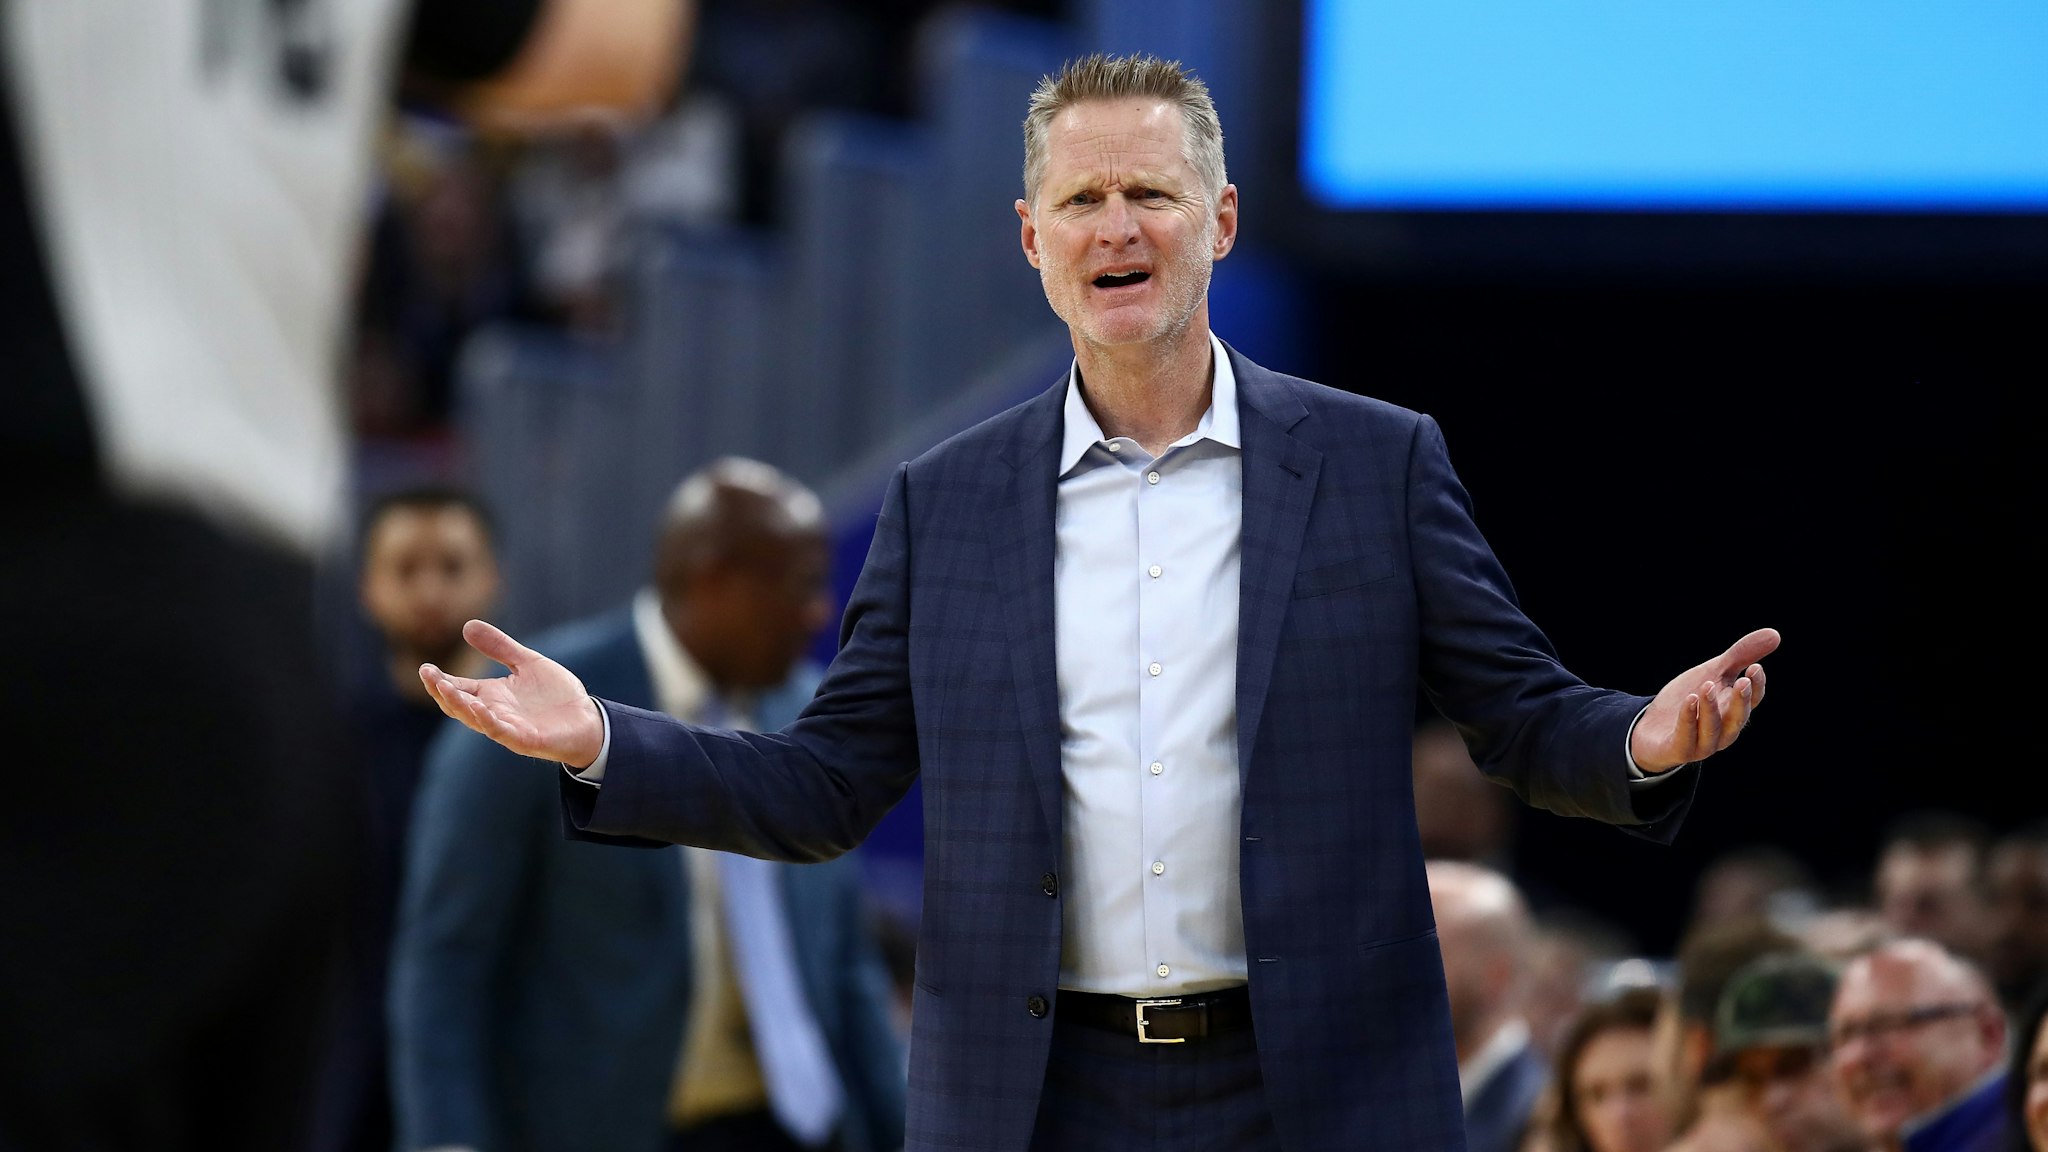 SAN FRANCISCO, CALIFORNIA - DECEMBER 23: Head coach Steve Kerr of the Golden State Warriors complains about a call during their game against the Minnesota Timberwolves at Chase Center on December 23, 2019 in San Francisco, California. NOTE TO USER: User expressly acknowledges and agrees that, by downloading and/or using this photograph, user is consenting to the terms and conditions of the Getty Images License Agreement. (Photo by Ezra Shaw/Getty Images)